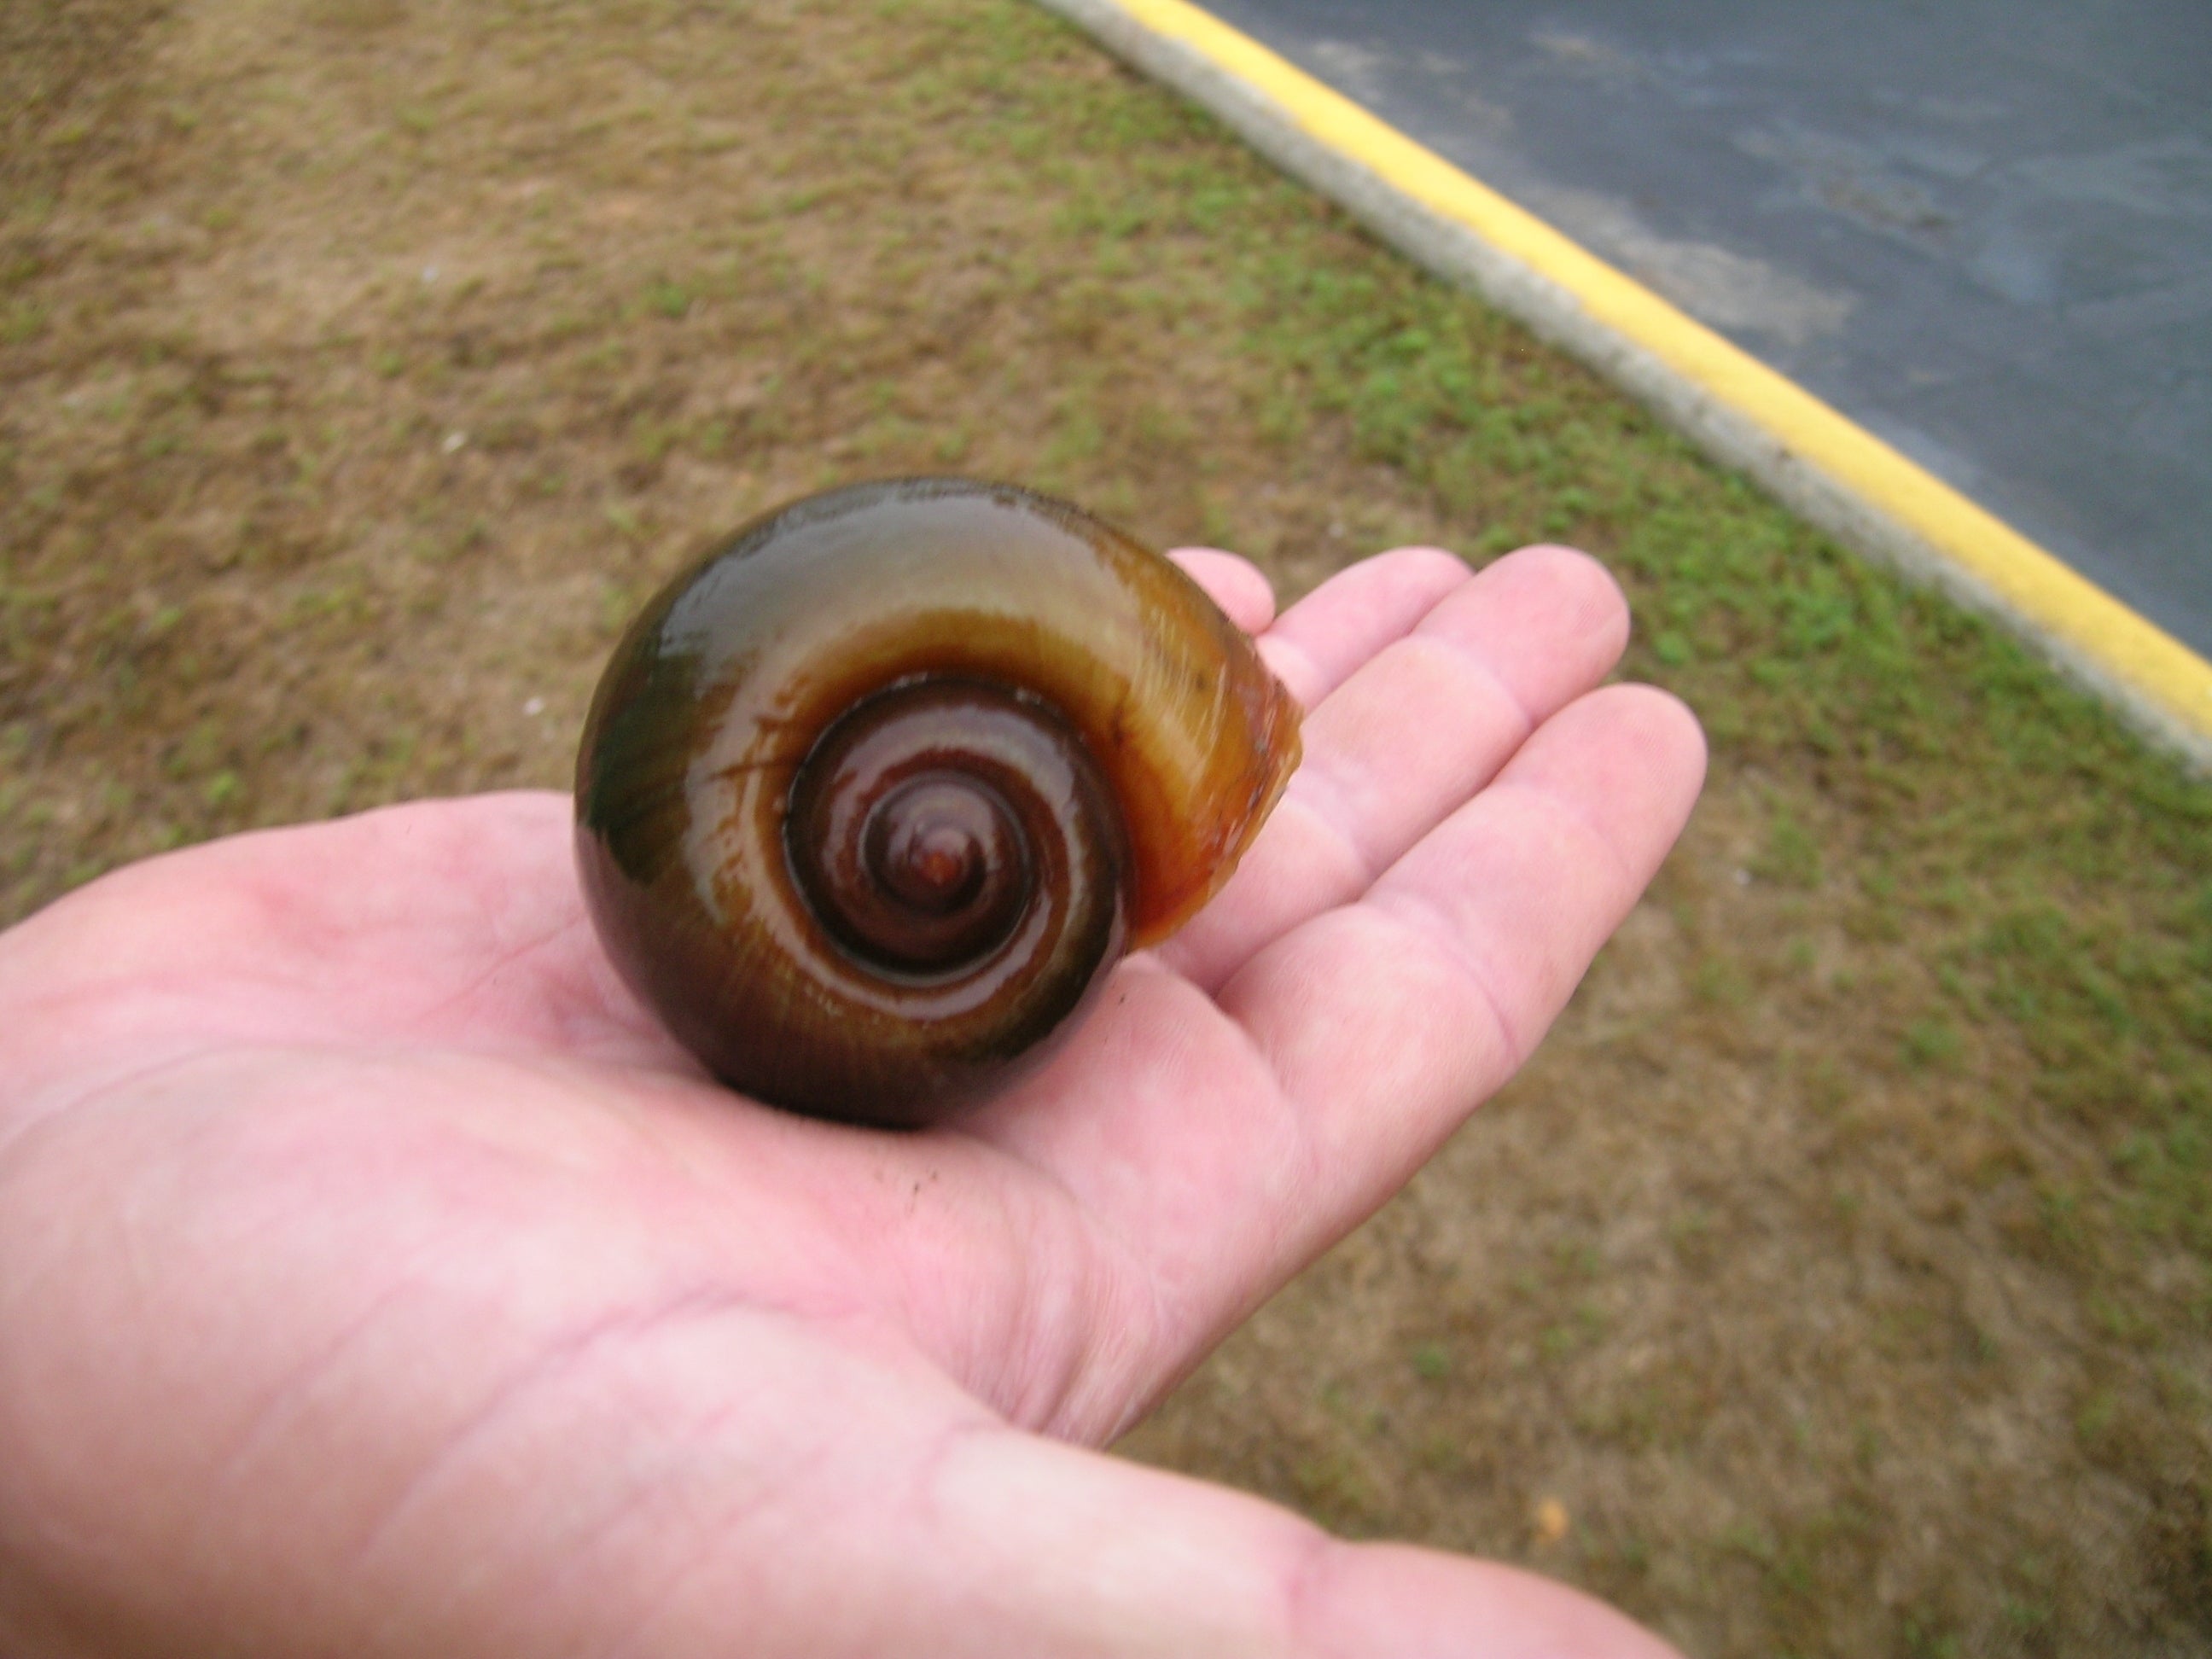 When a non-native species like the Island Applesnail is introduced into an ecosystem, the results are often unpredictable.